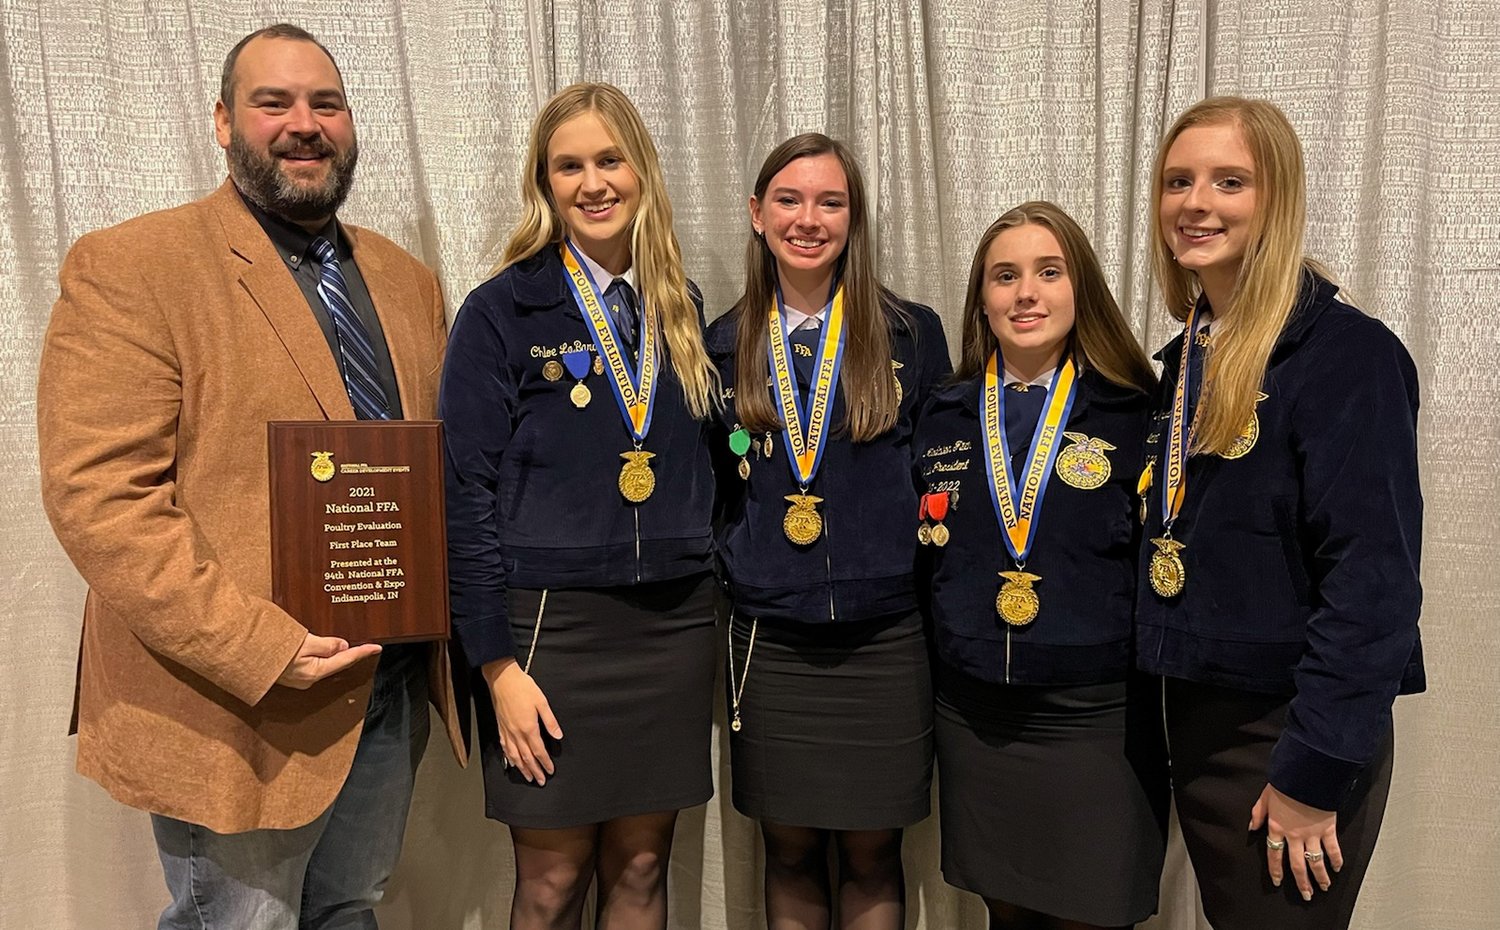 Taylor High School agricultural sciences teacher and Future Farmers of America coach David Laird (left) holds the plaque naming Taylor FFA as the national champions in poultry evaluation for 2021. He is accompanied by Taylor FFA poultry team members (from left to right) Chloe LaBard, Kristen Justilian, Madailein Fitch and Taylor FFA president Kathryn “Kacki” Kyrisch who each placed in the top five of individual events in addition to winning the overall team championship.